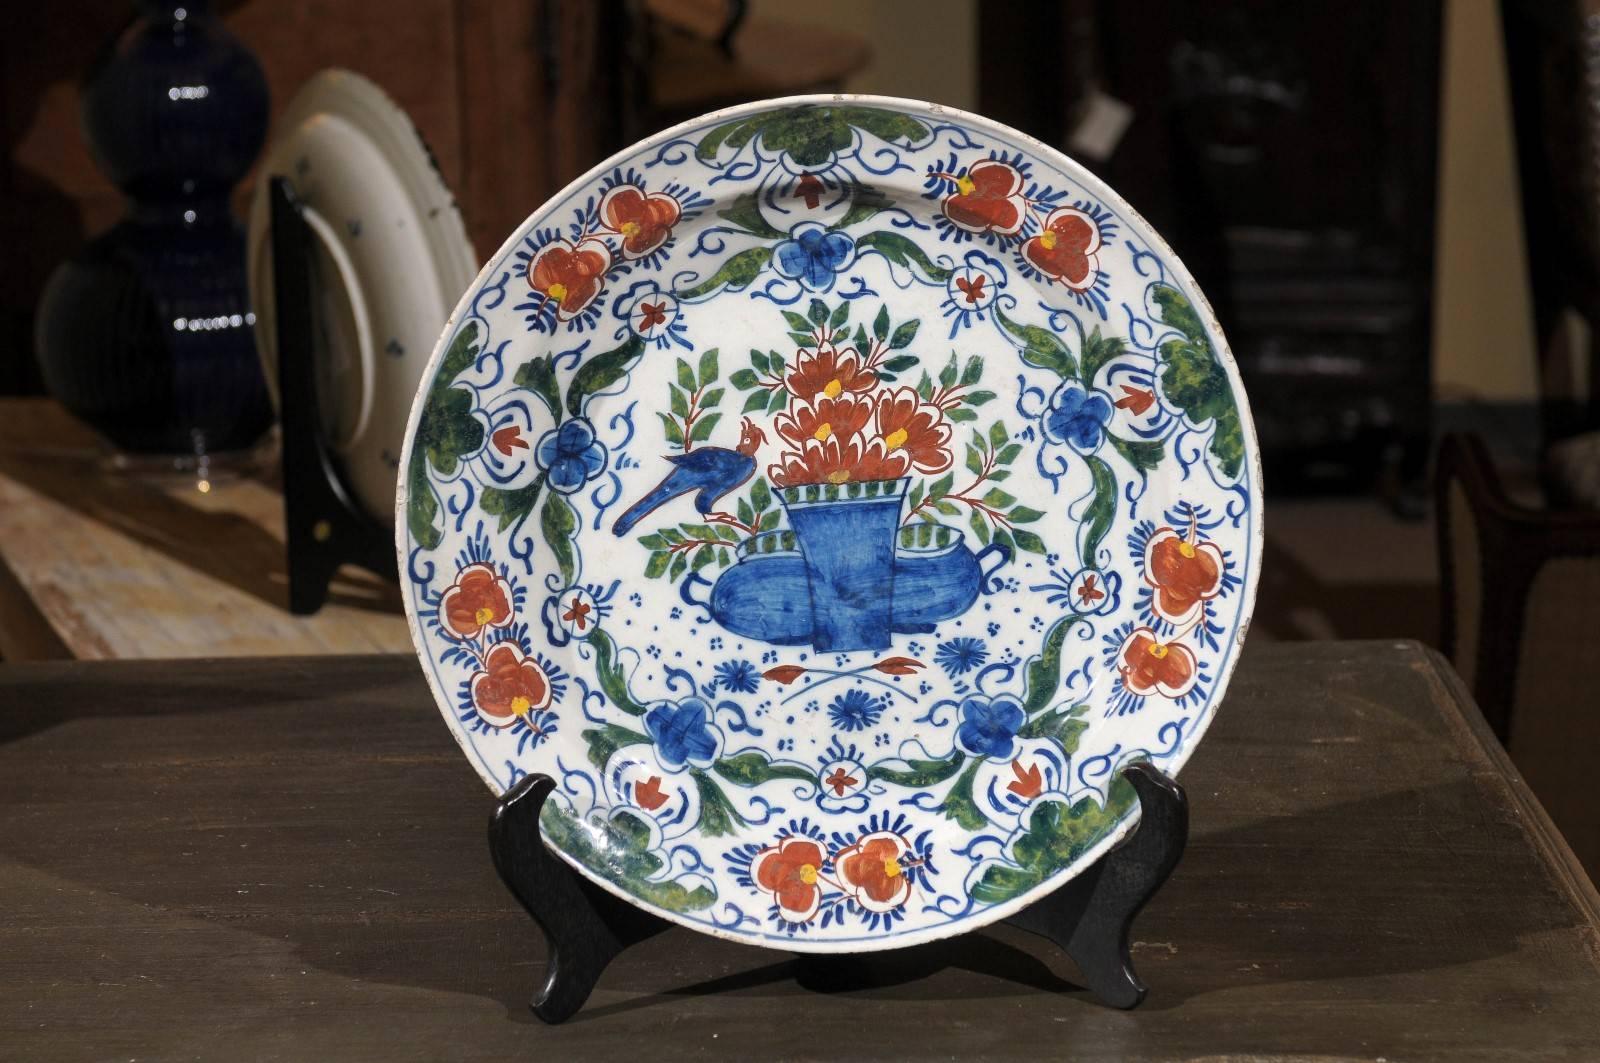 A very vibrant polychrome Delft charger to add to your collection or stand alone.